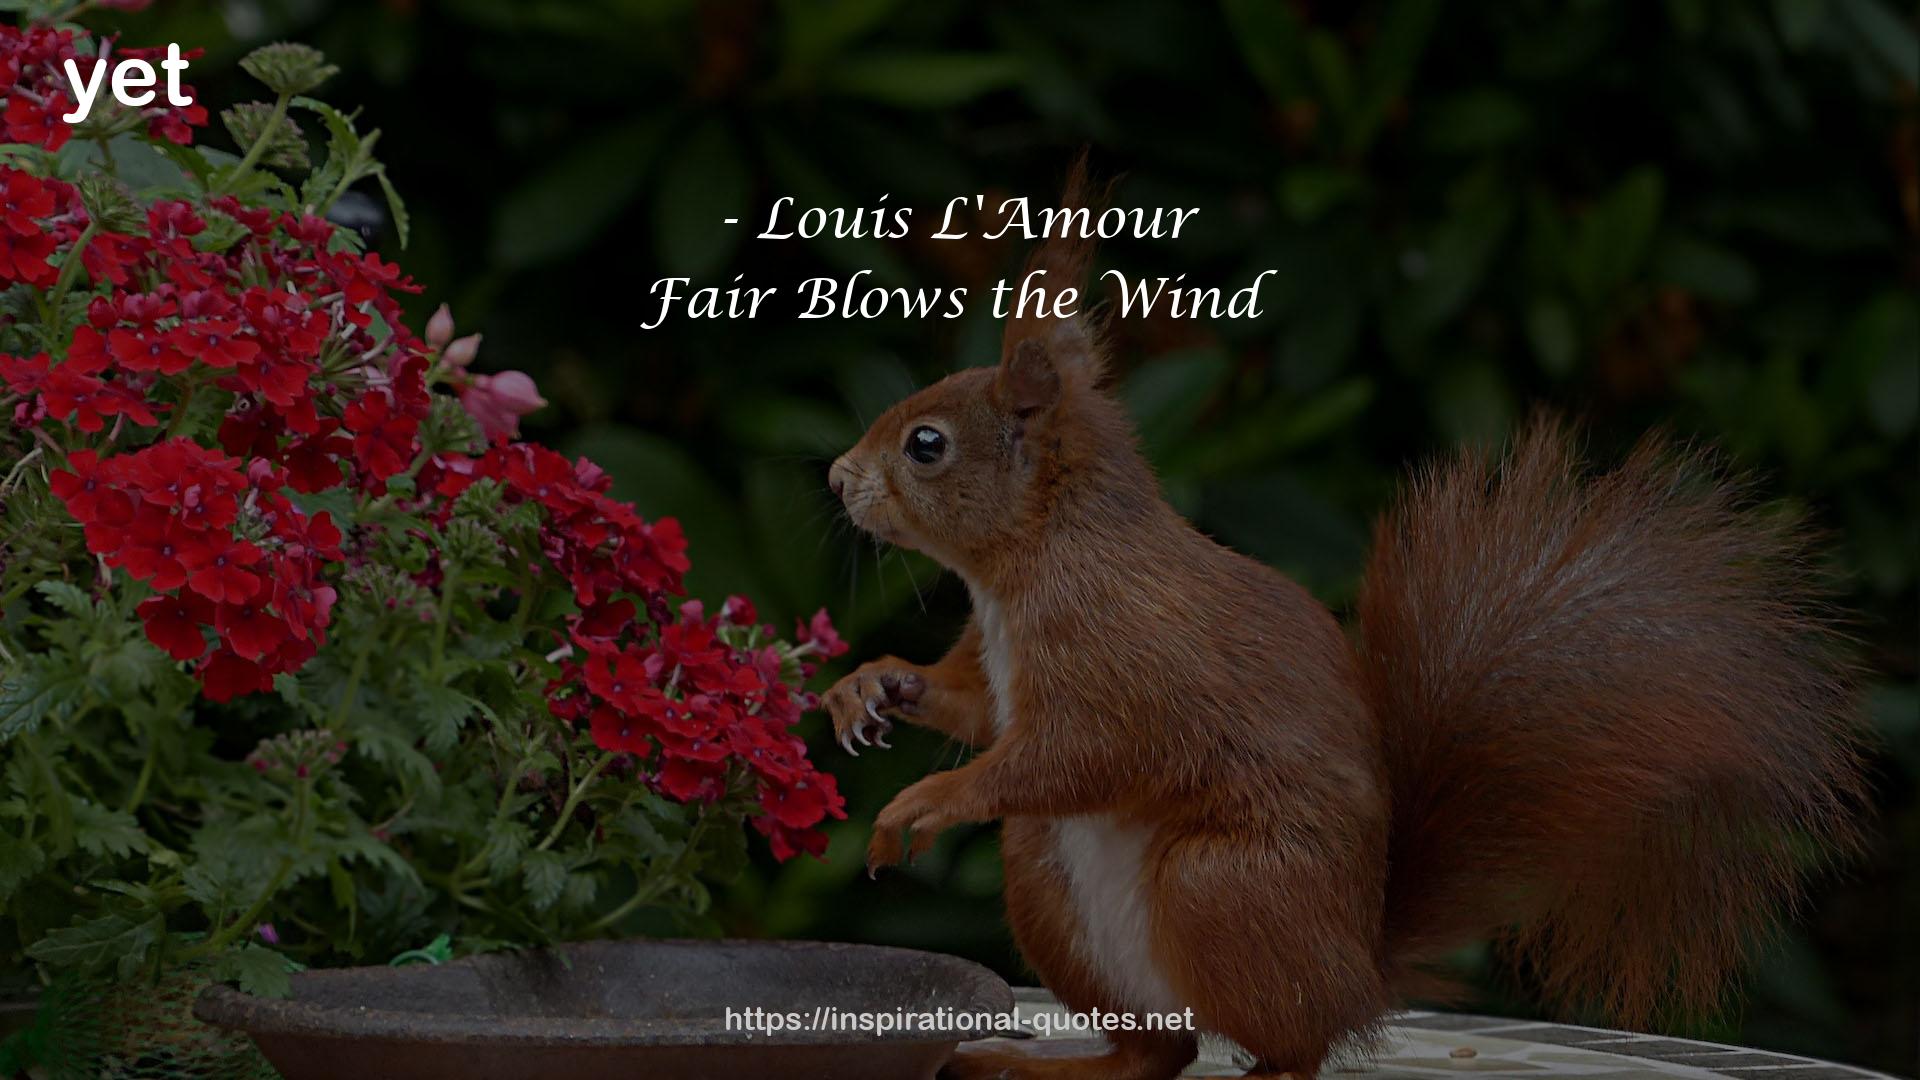 Fair Blows the Wind QUOTES